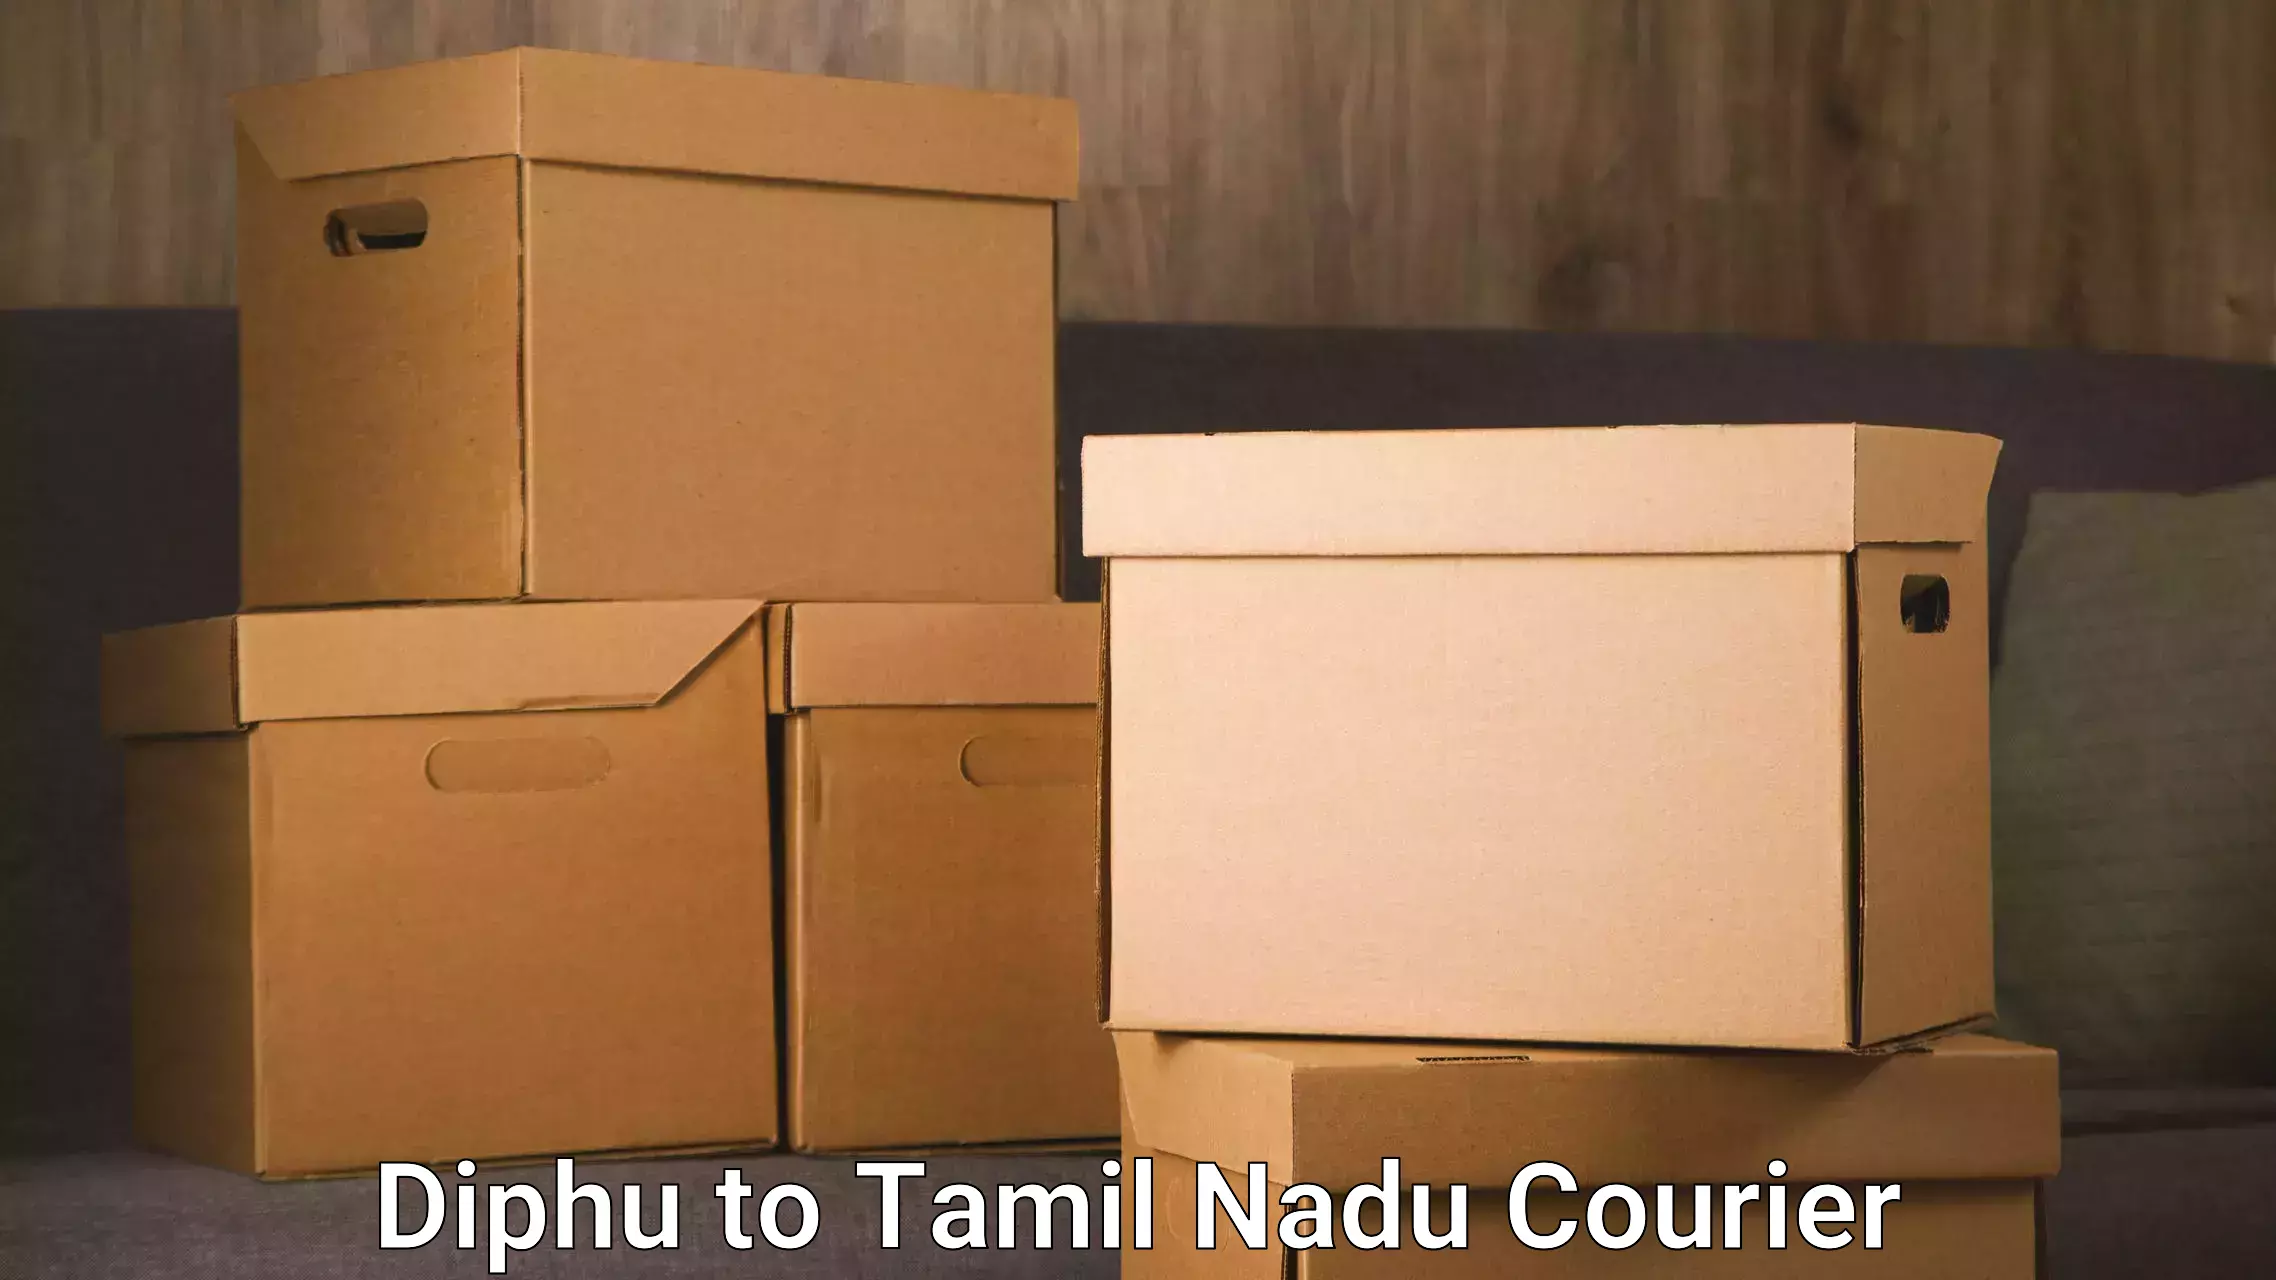 Global courier networks Diphu to Valparai